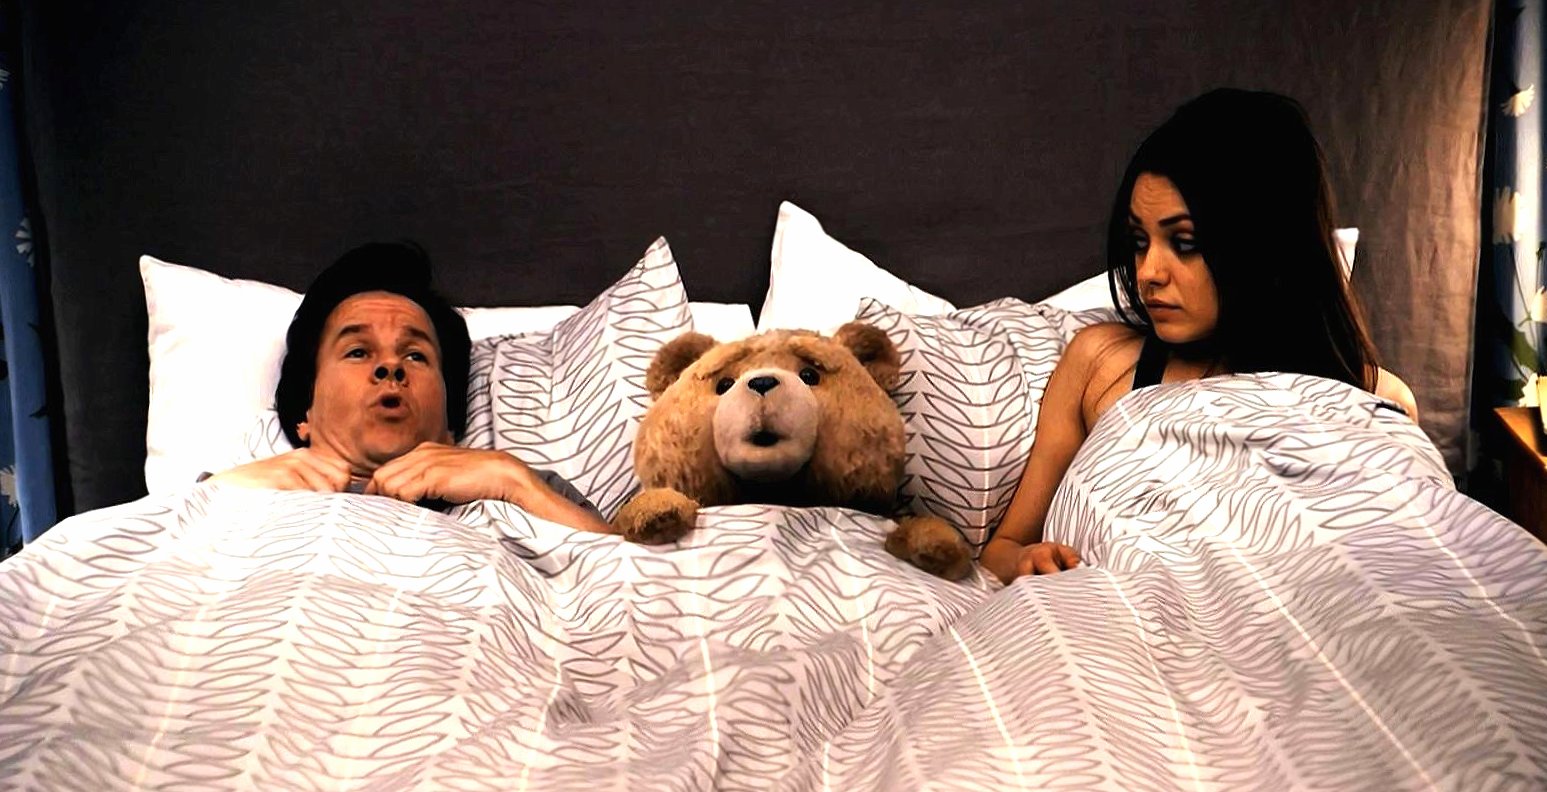 Weird bear in bed wallpapers HD quality